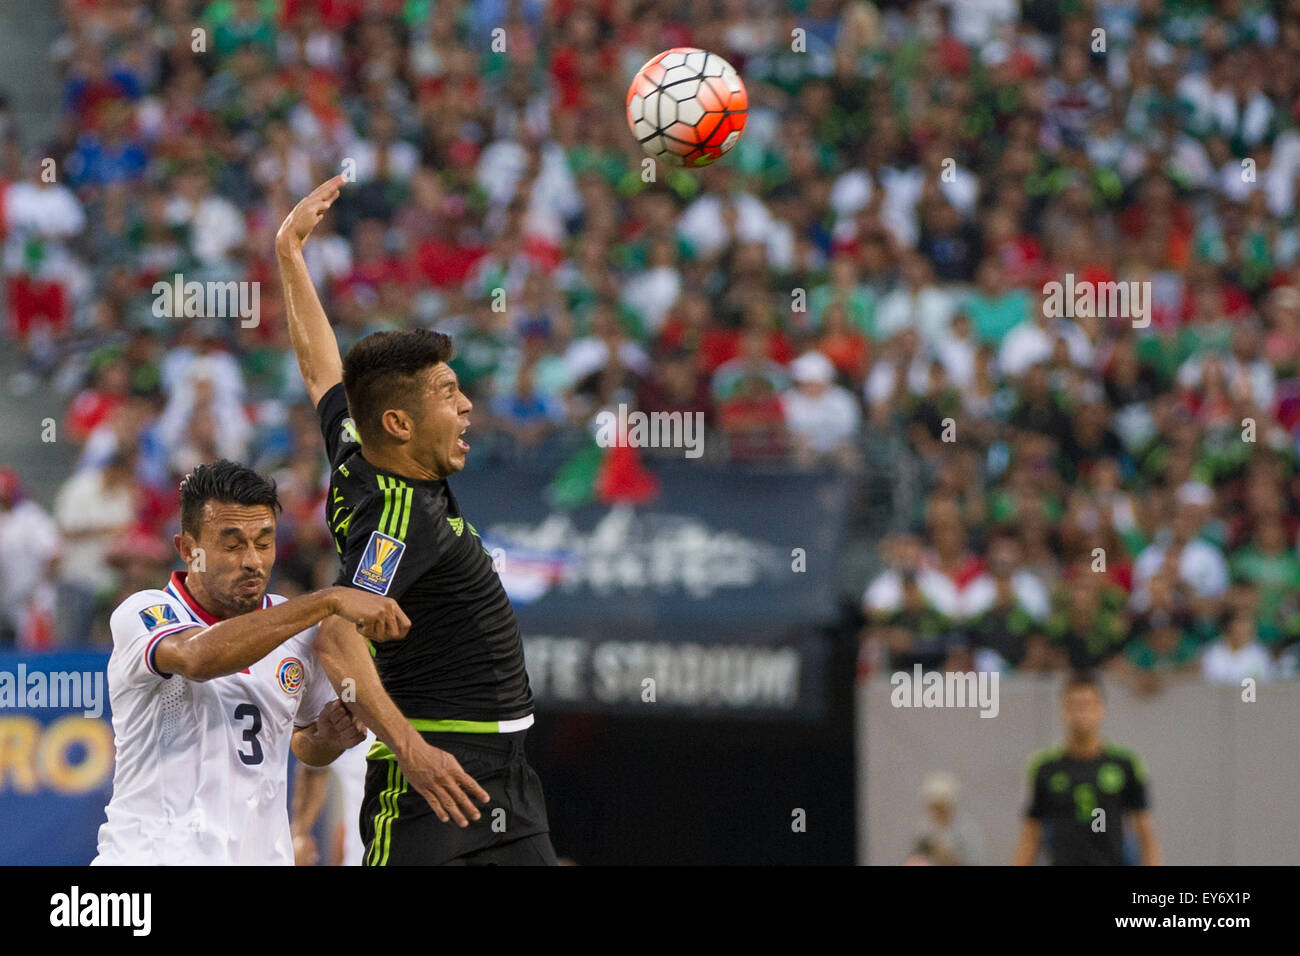 Extra Time. 19th July, 2015. Mexico forward Oribe Peralta (19) strikes a pose as he reacts to heading a ball over Costa Rica defender Giancarlo Gonzalez (3) during the quarter-finals of The CONCACAF Gold Cup match between Mexico and Costa Rica at Met Life Stadium, East Rutherford, NJ. Mexico defeated Costa Rica 1-0 in the final minute of extra time. Mandatory Credit: Kostas Lymperopoulos/CSM/Alamy Live News Stock Photo